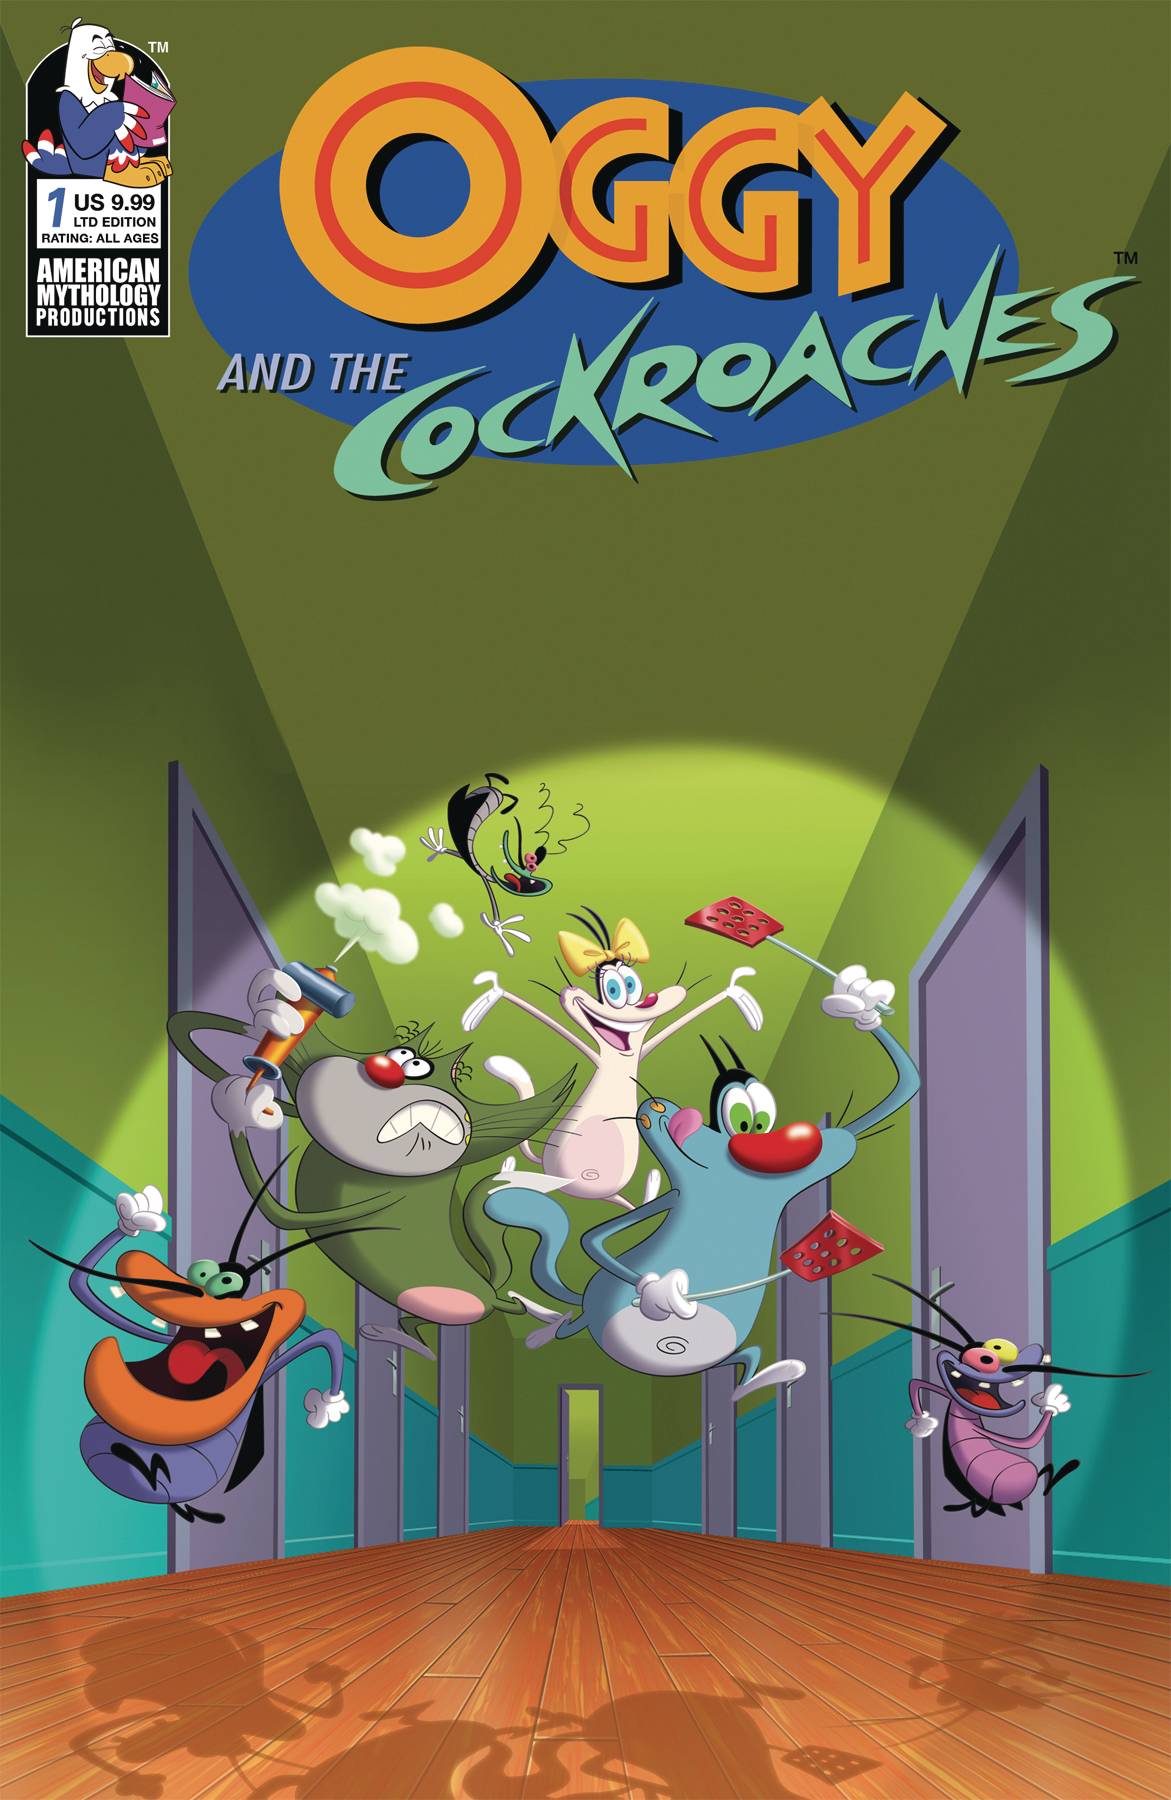 Oggy & The Cockroaches #1 Cover C Limited Edition Animation Cel Homage